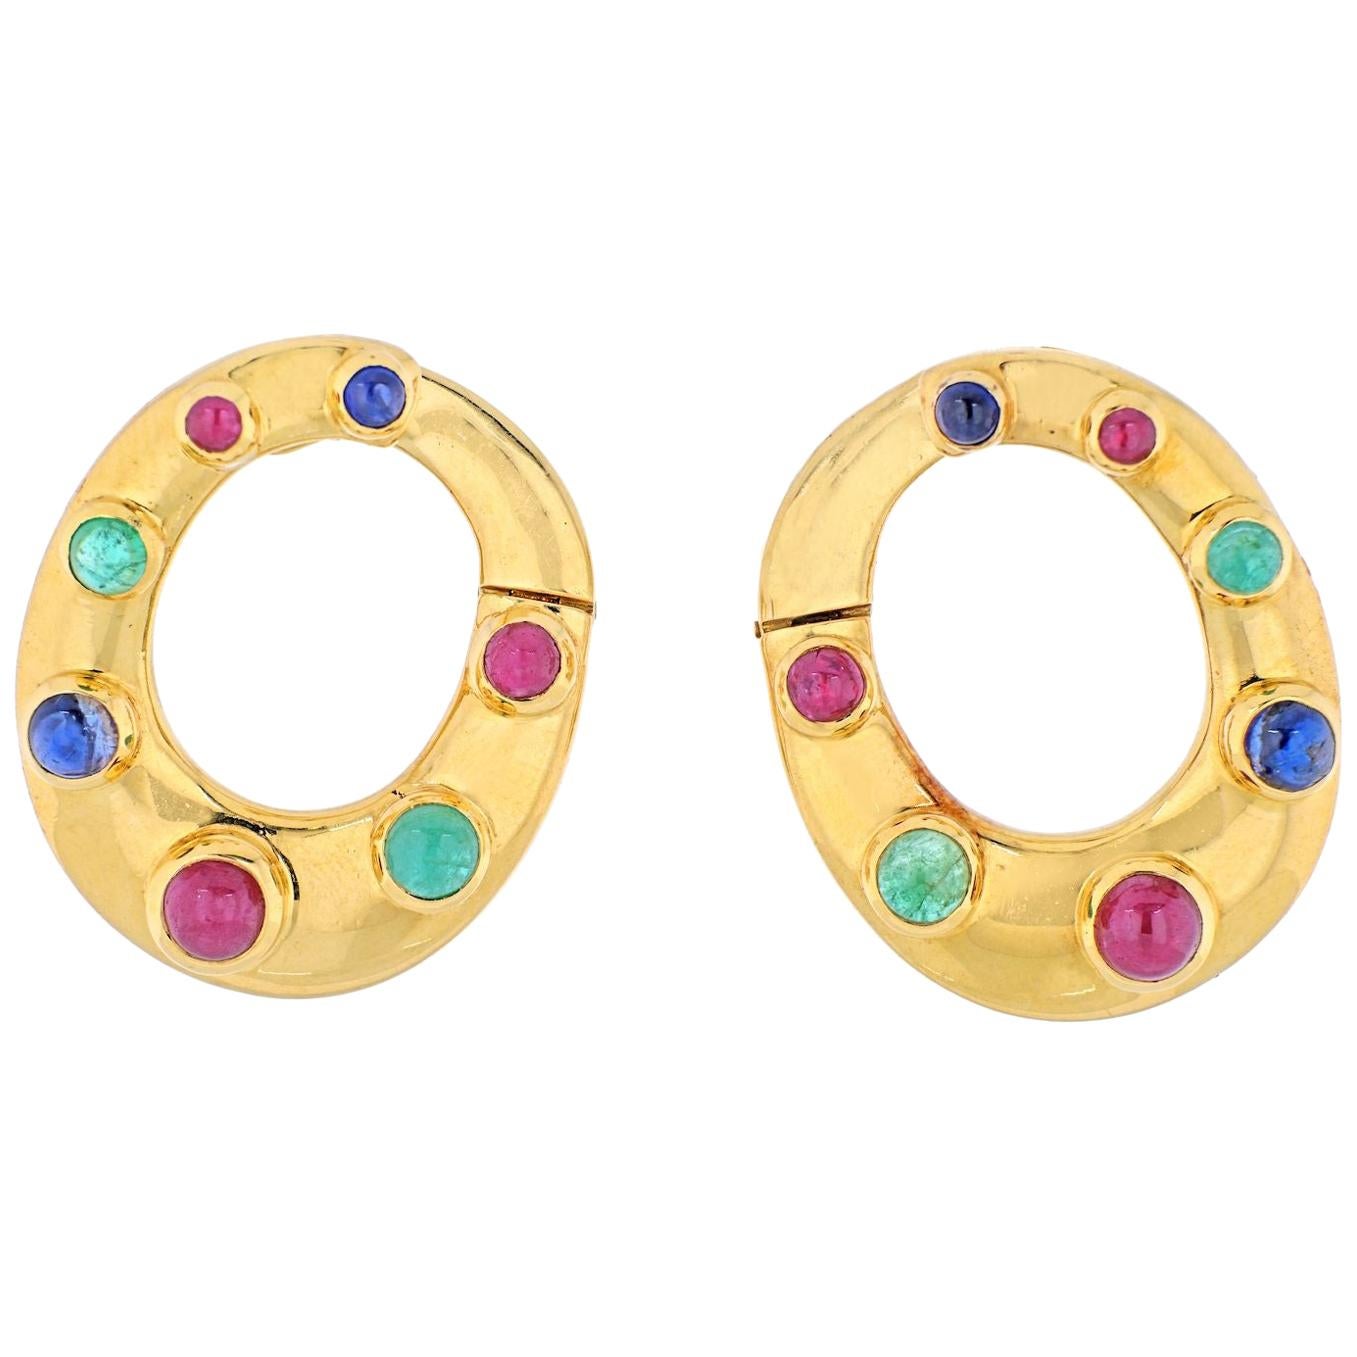 David Webb 18K Yellow Gold Oval Shaped Sapphires, Emeralds and Rubies Earrings